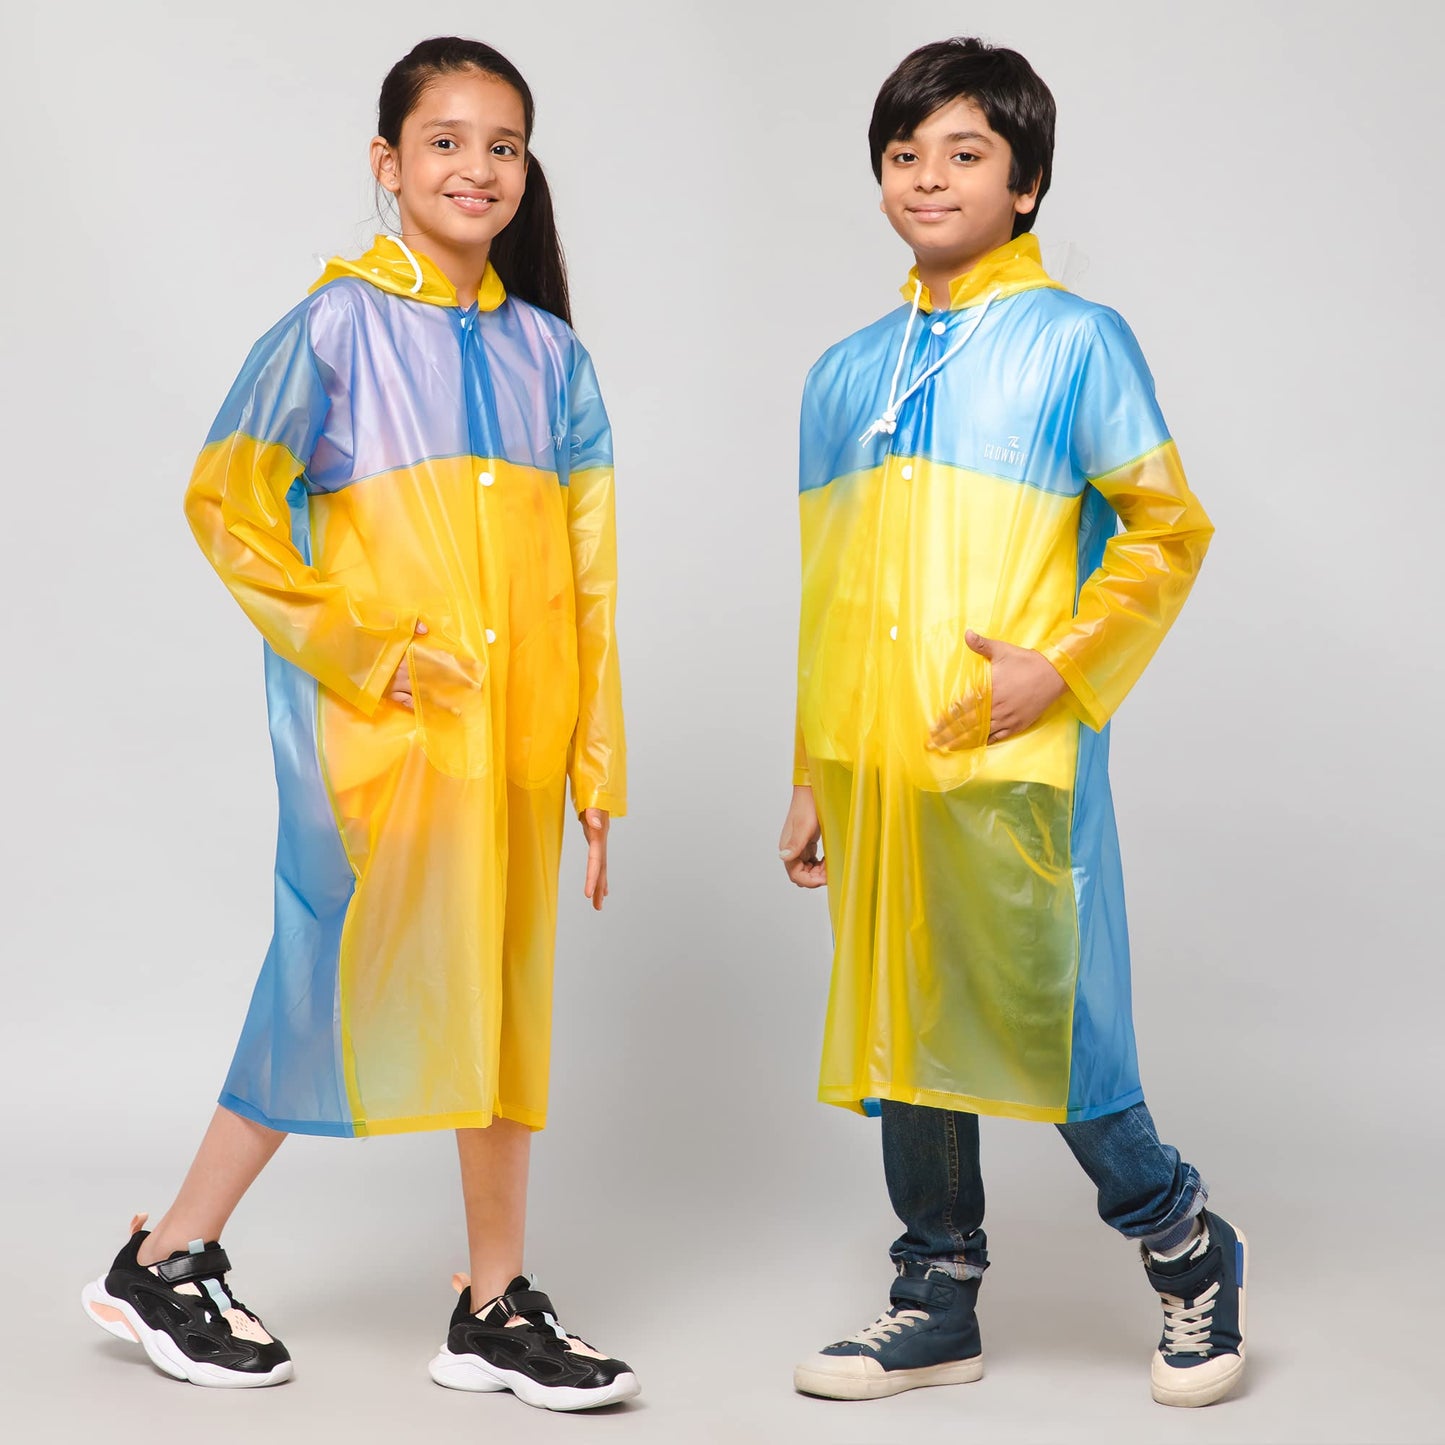 THE CLOWNFISH Puddle Jumper Series Unisex Kids Waterproof Single Layer PVC Longcoat/Raincoat with Adjustable Hood. Age-3-4 Years (Fluoroscent Pink)